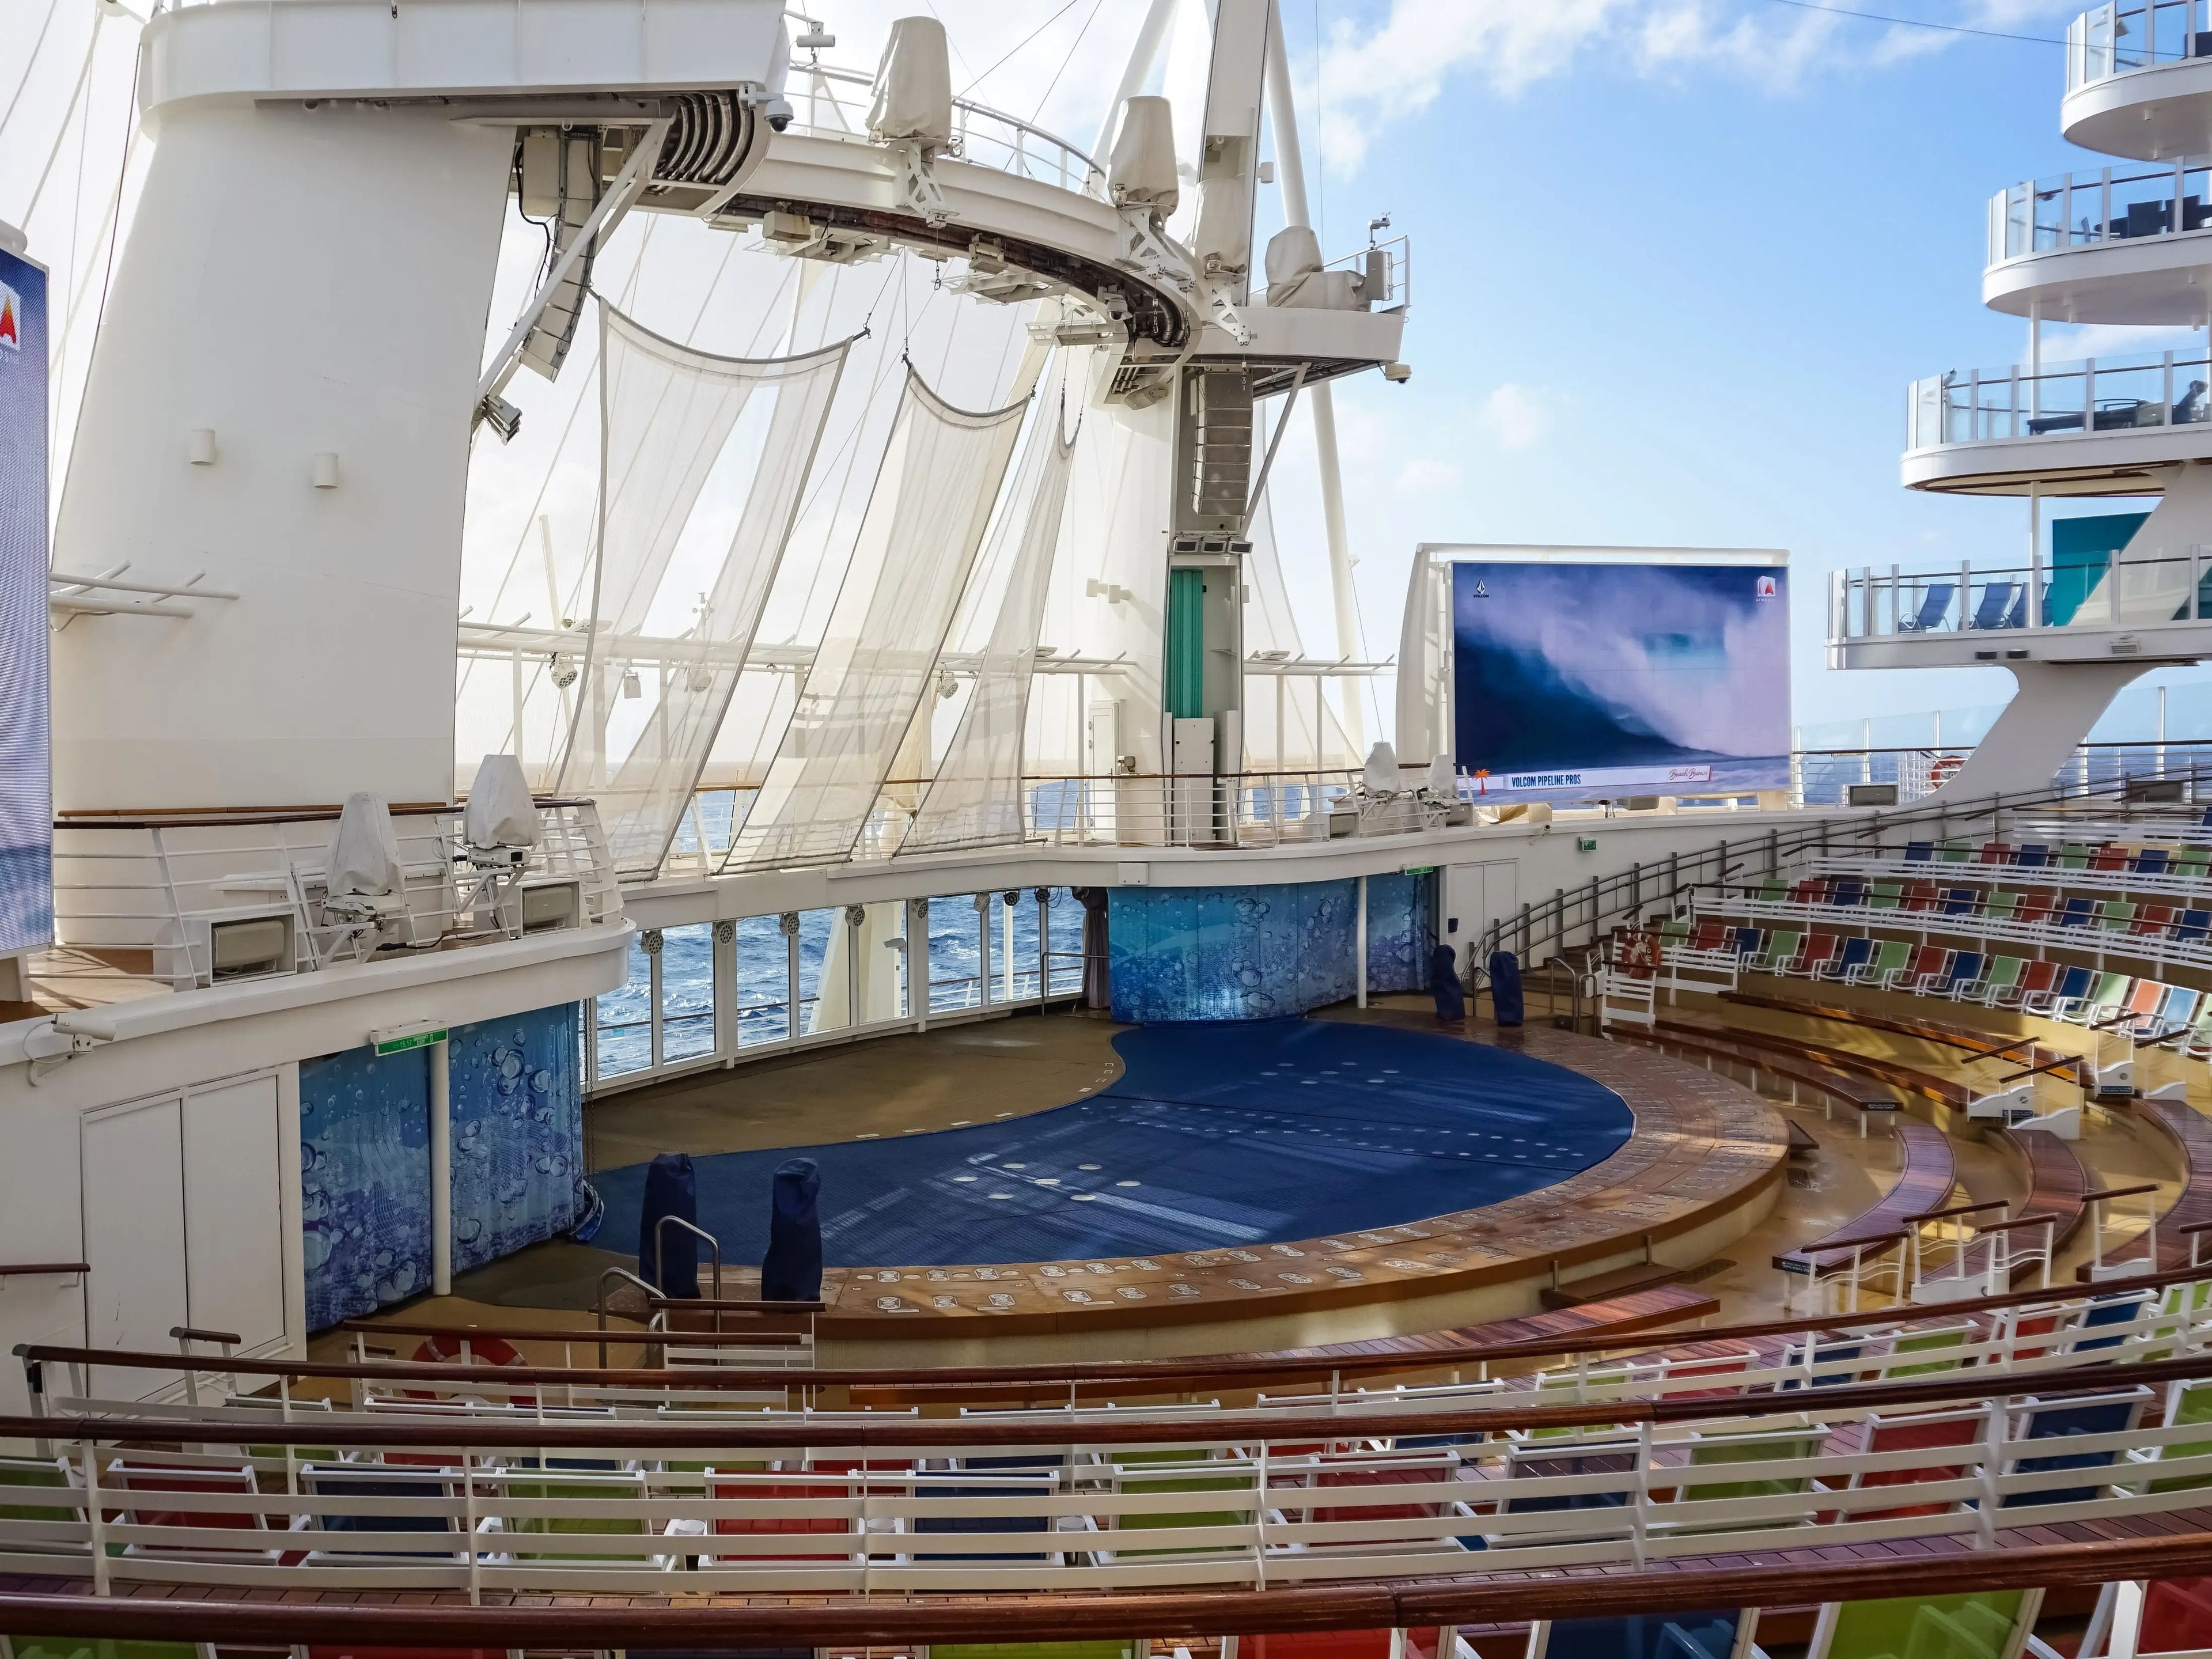 Outdoor theatre on cruise ship with blue skies in the background